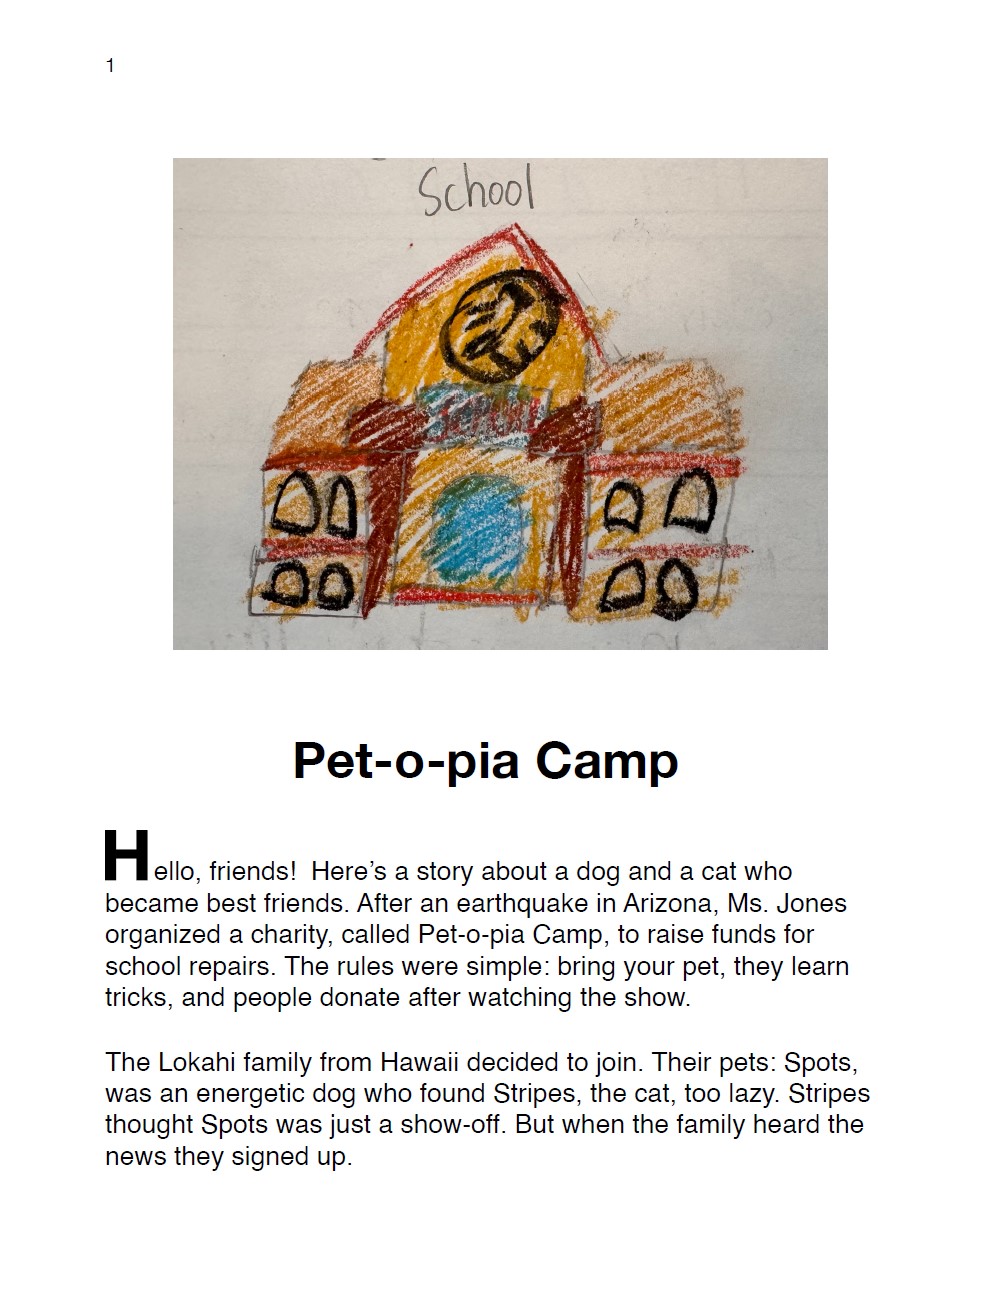 Pet-o-pia Camp by Riona S.